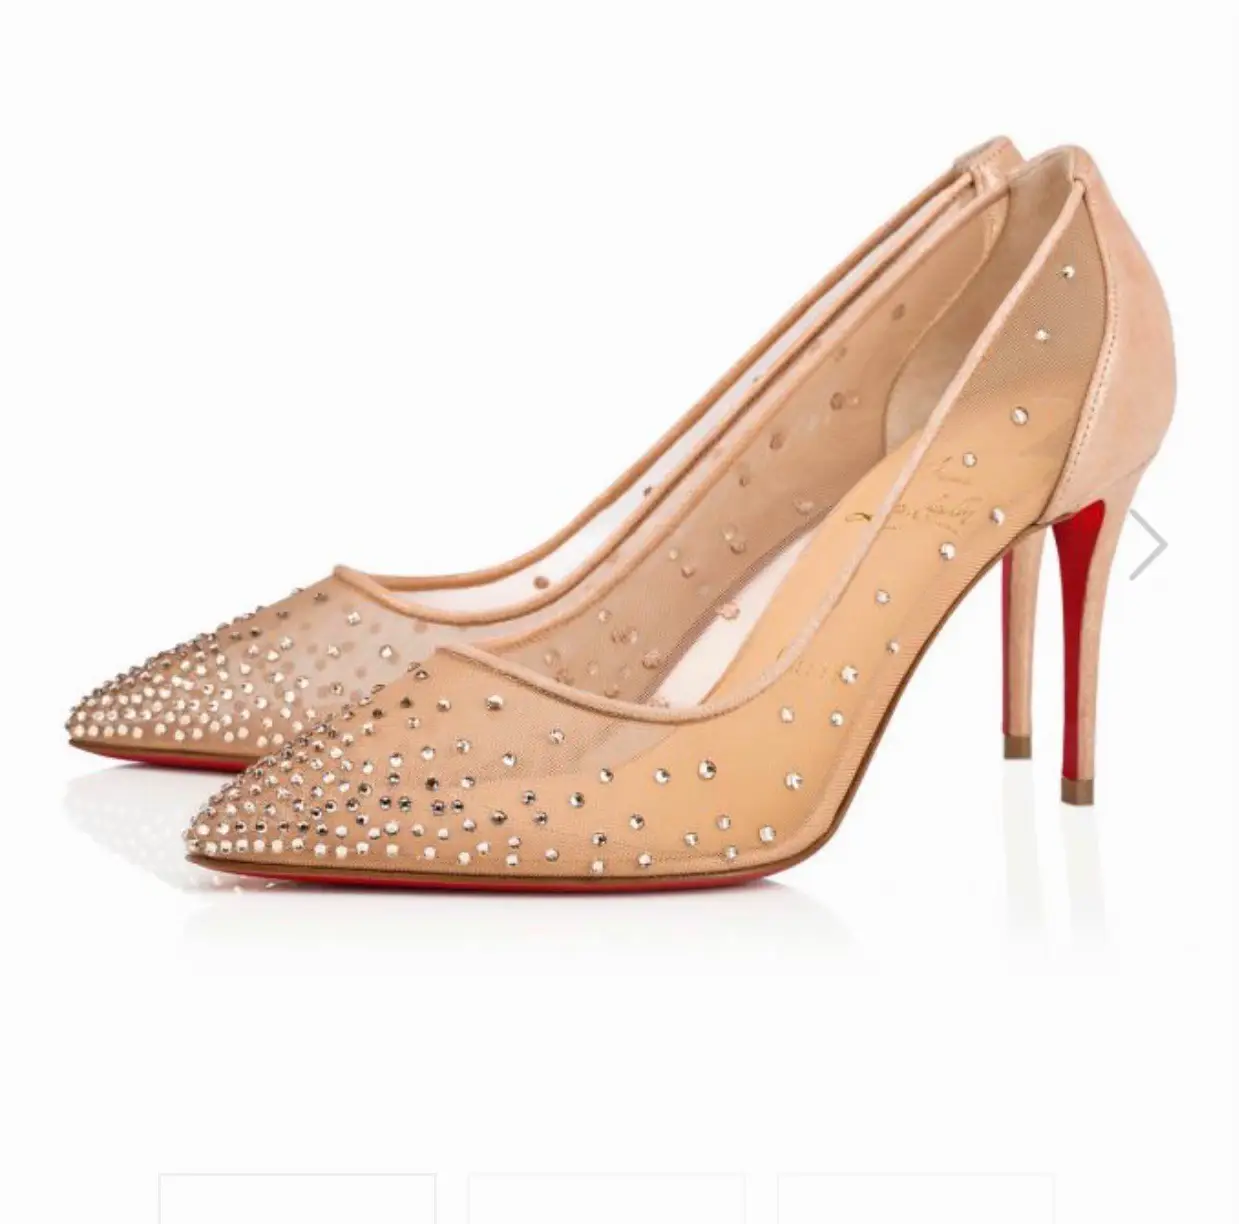 Christian Louboutin Bicester! Swipe for a surprise